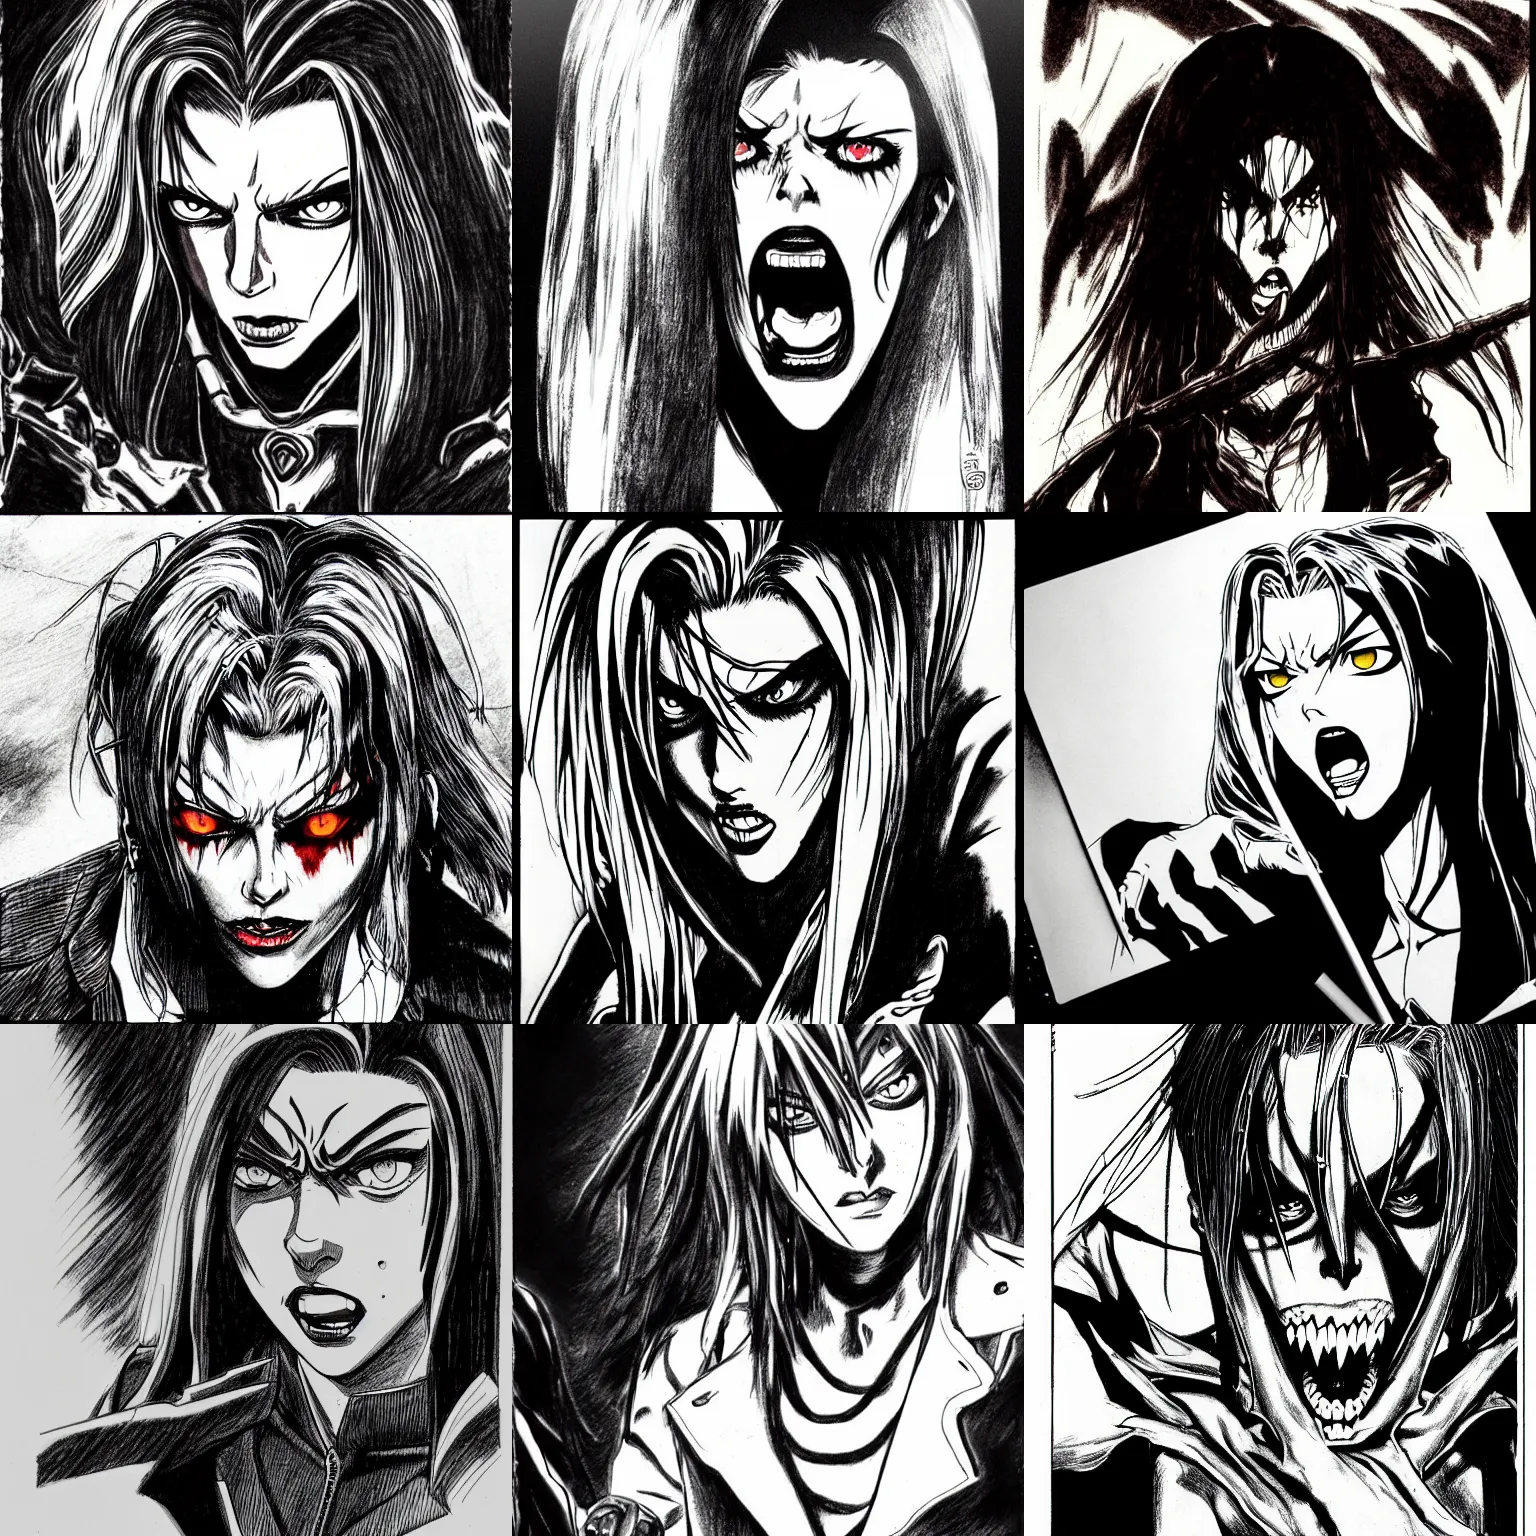 Prompt: scary scarlett johansson with angry expression as vampire in van hellsing anime. dramatic lighting, anime style, pencil and ink manga drawing, centered in panel